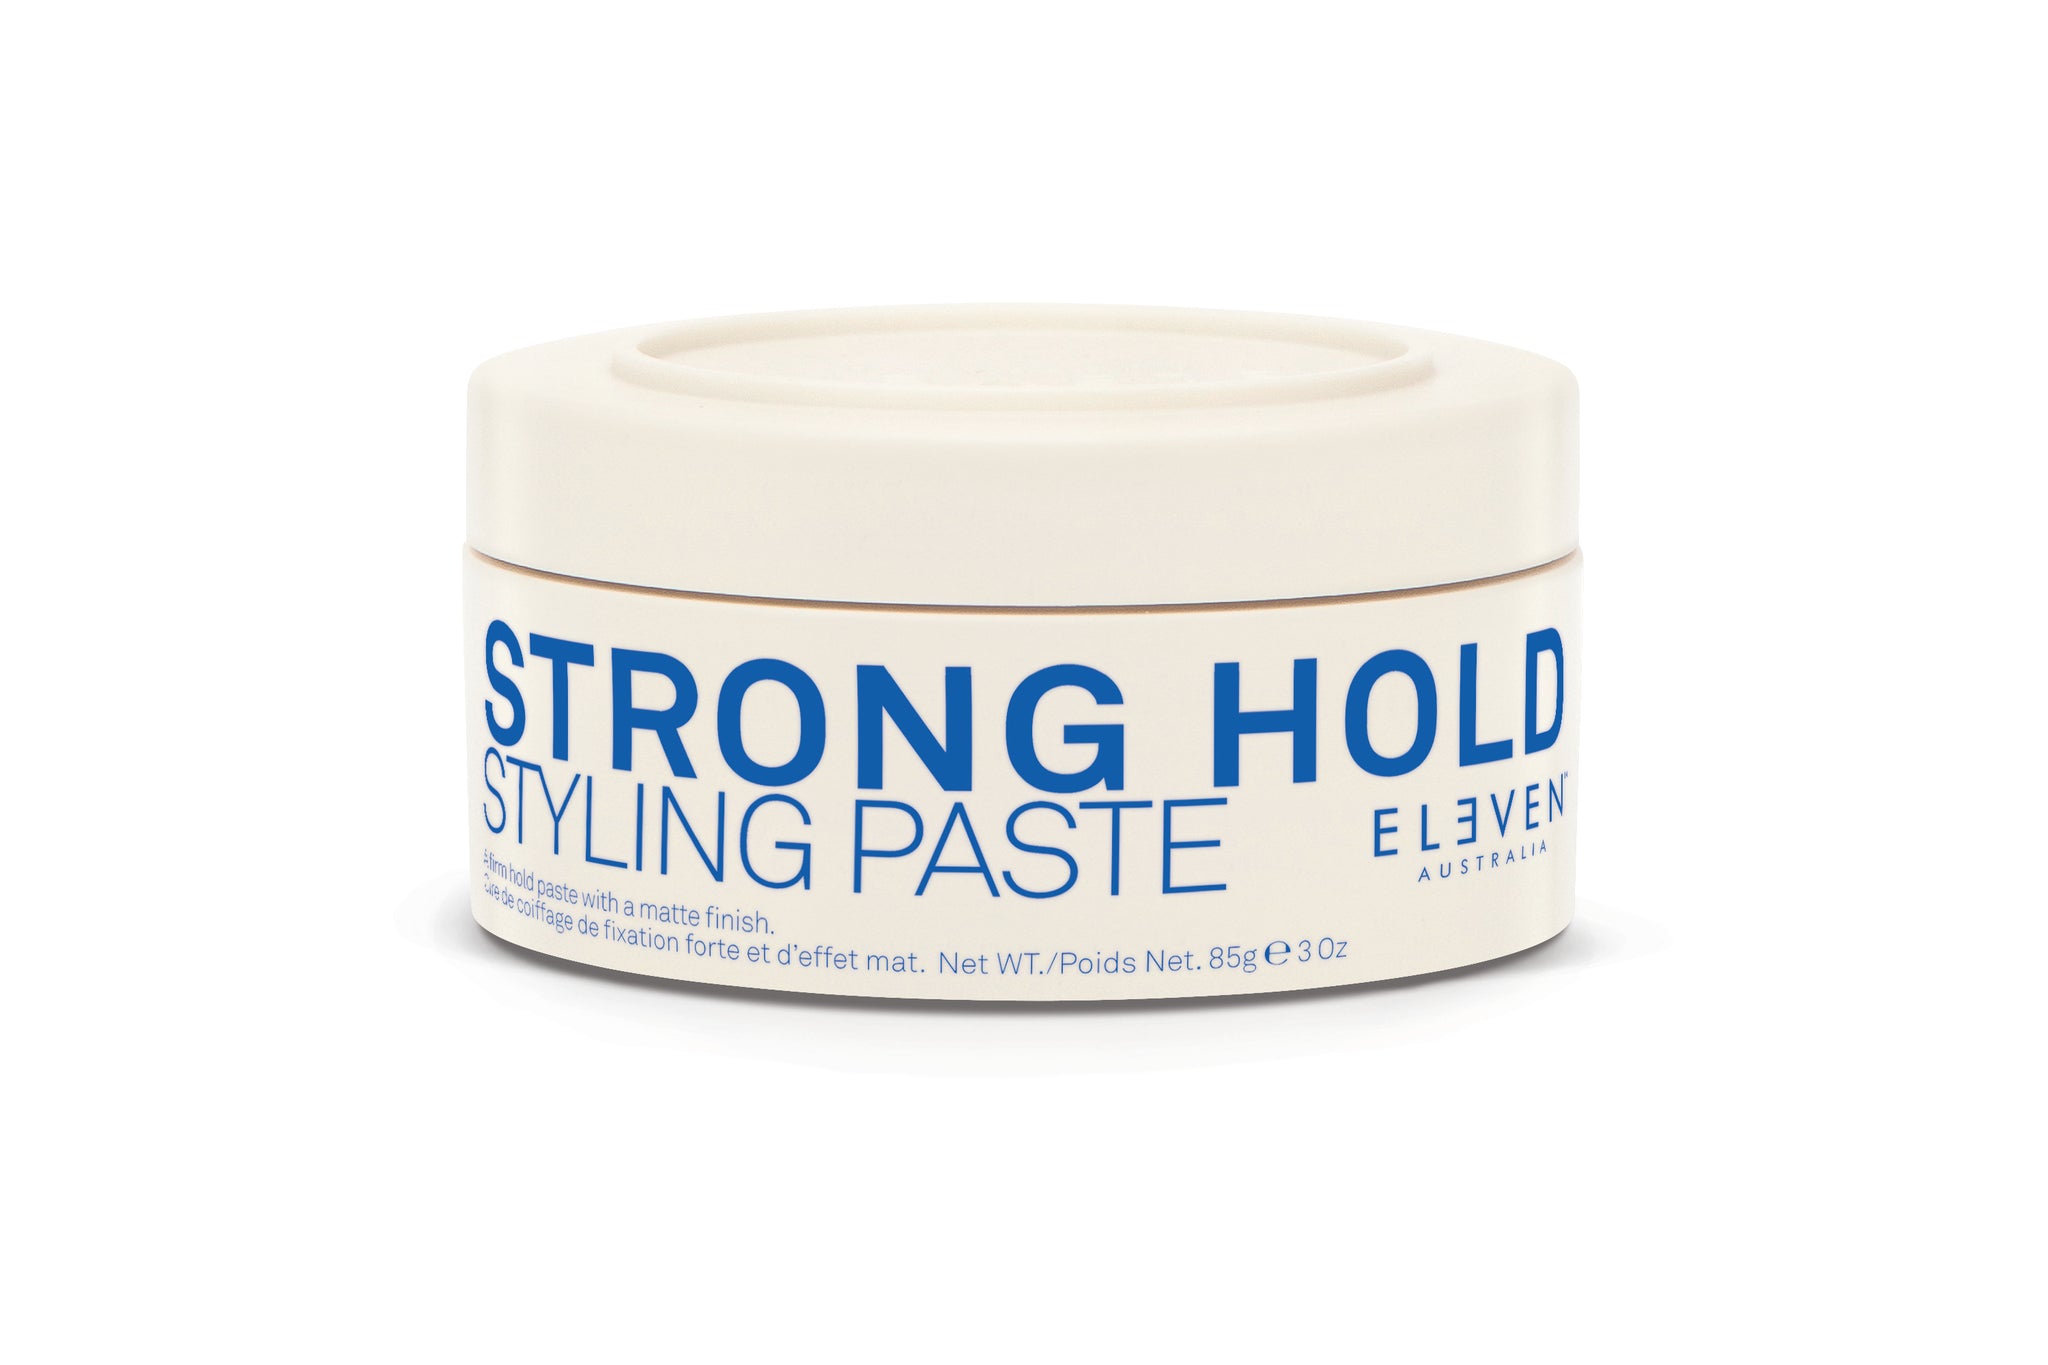 STRONG HOLD STYLING PASTE 85g DS